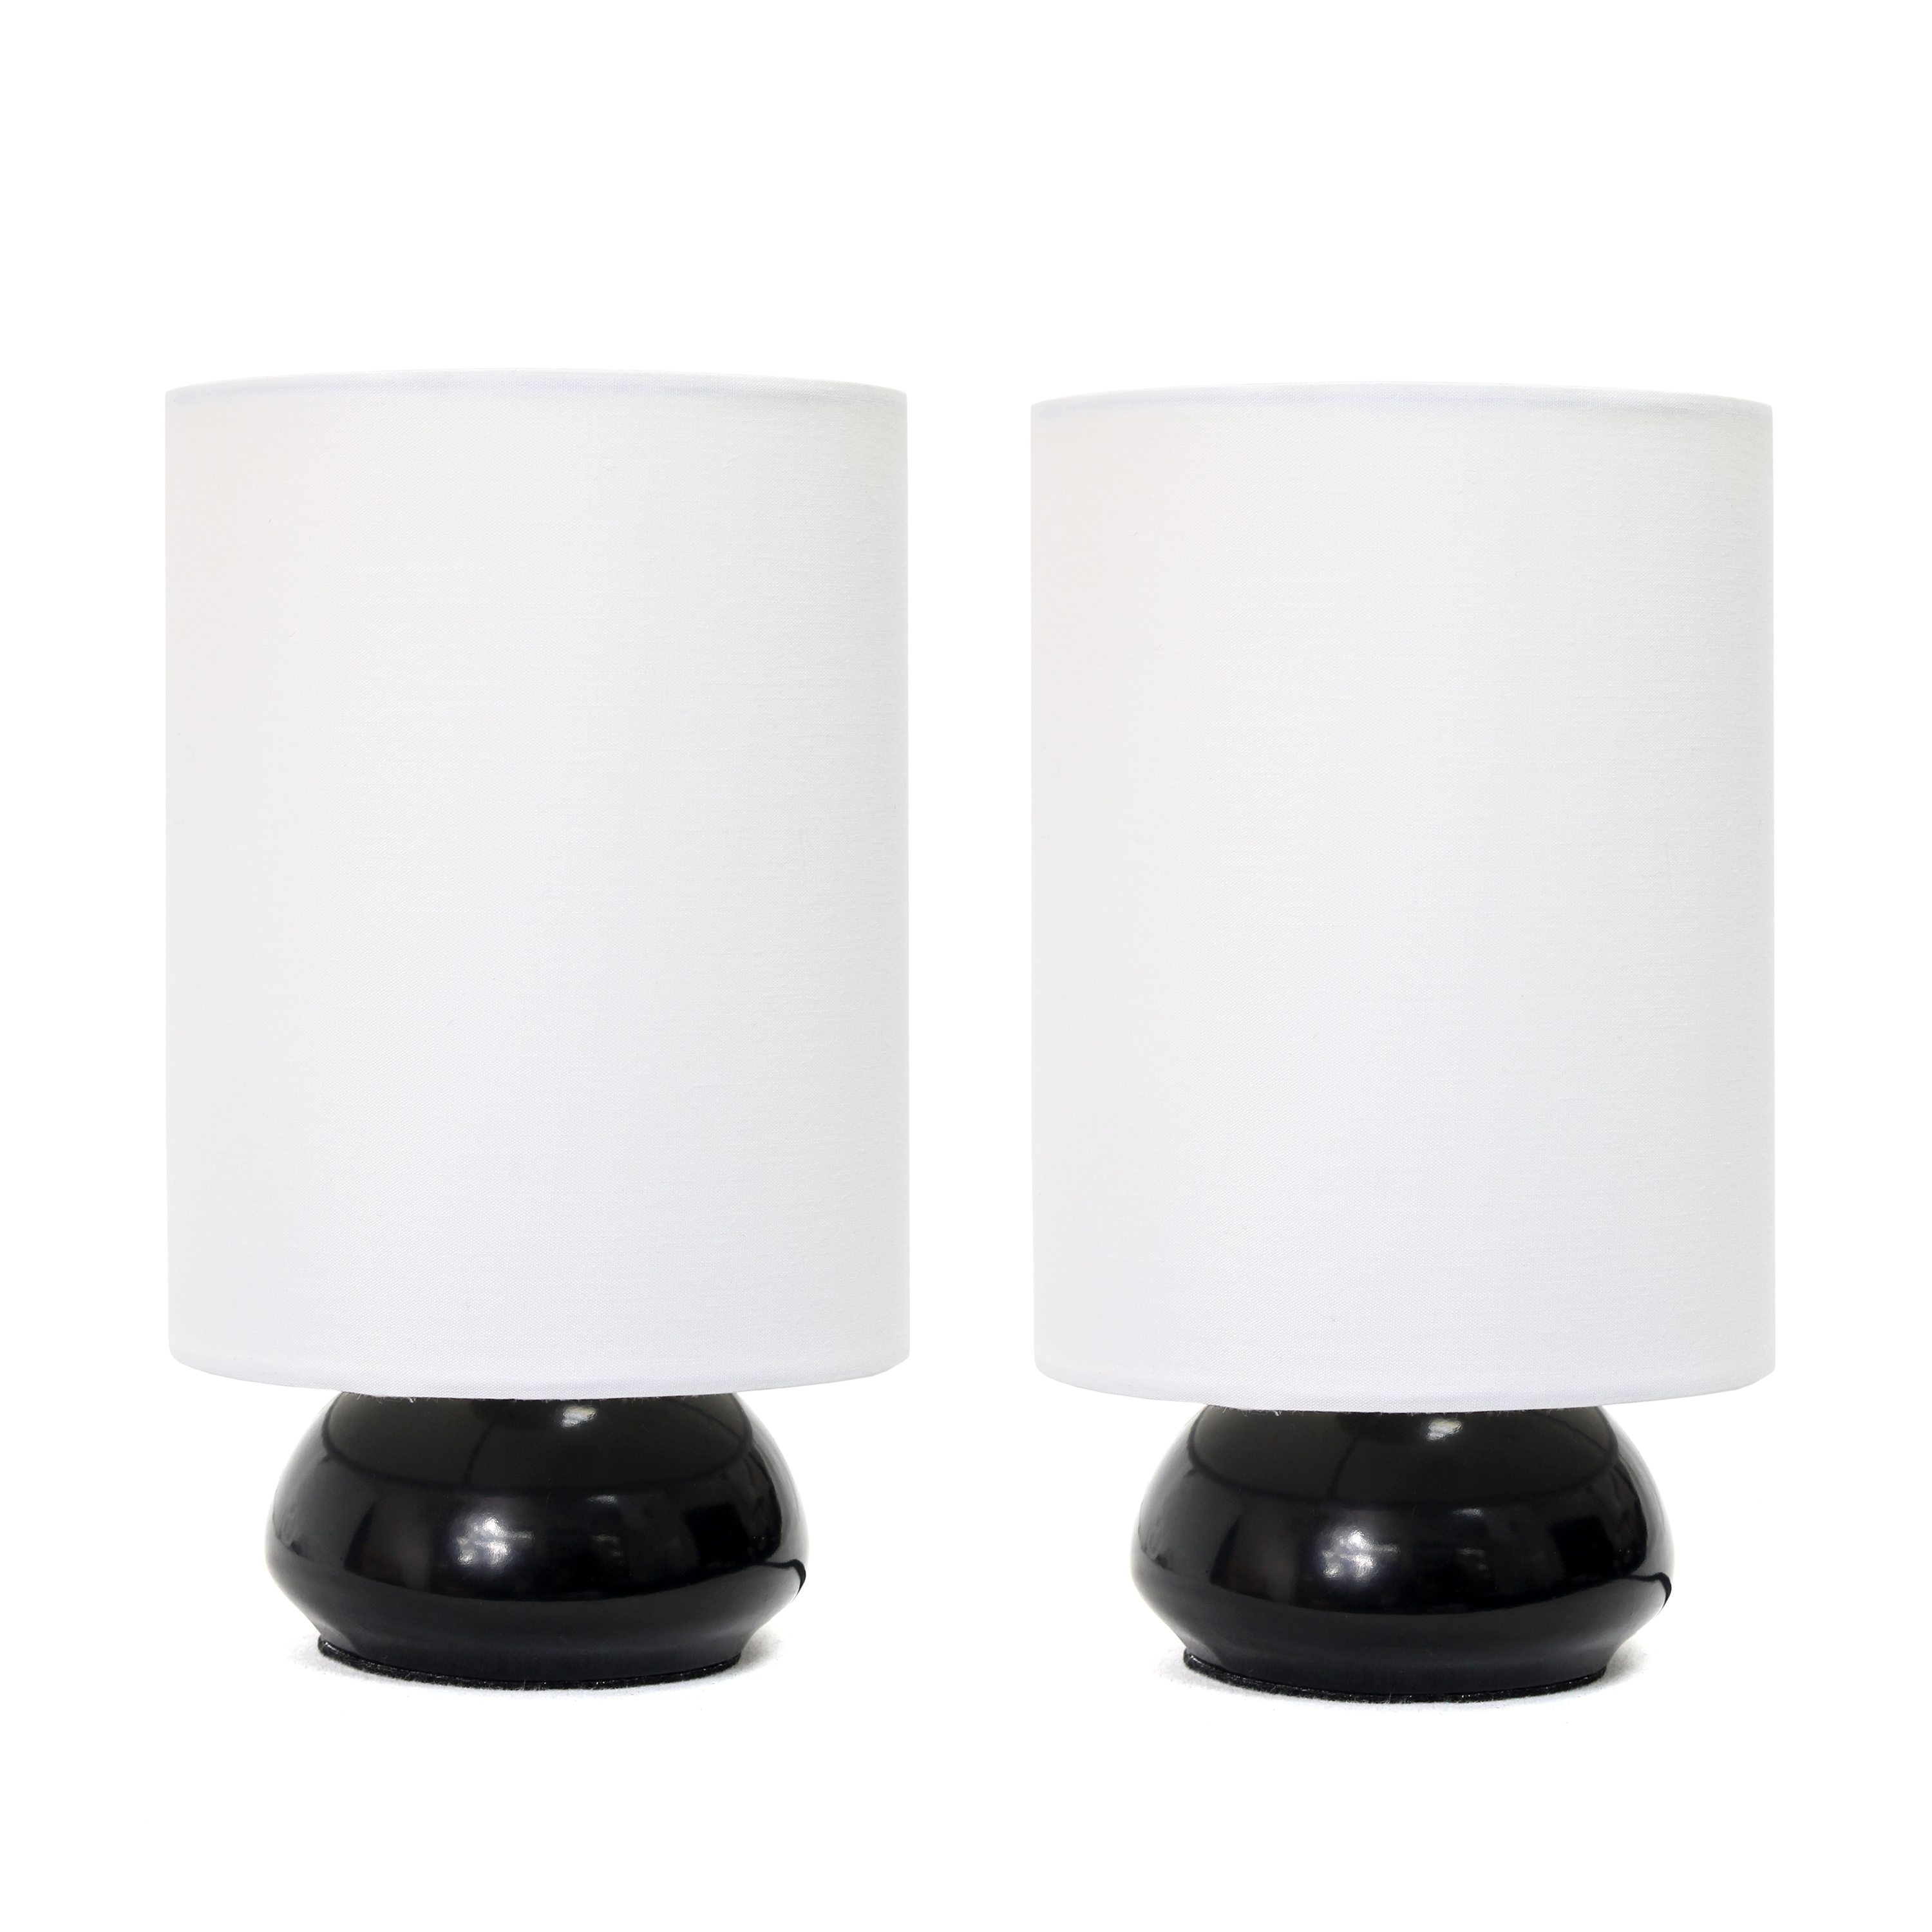 Simple Designs Gemini Colors 2 Pack Mini Touch Table Lamp Set with Fabric Shades, Black